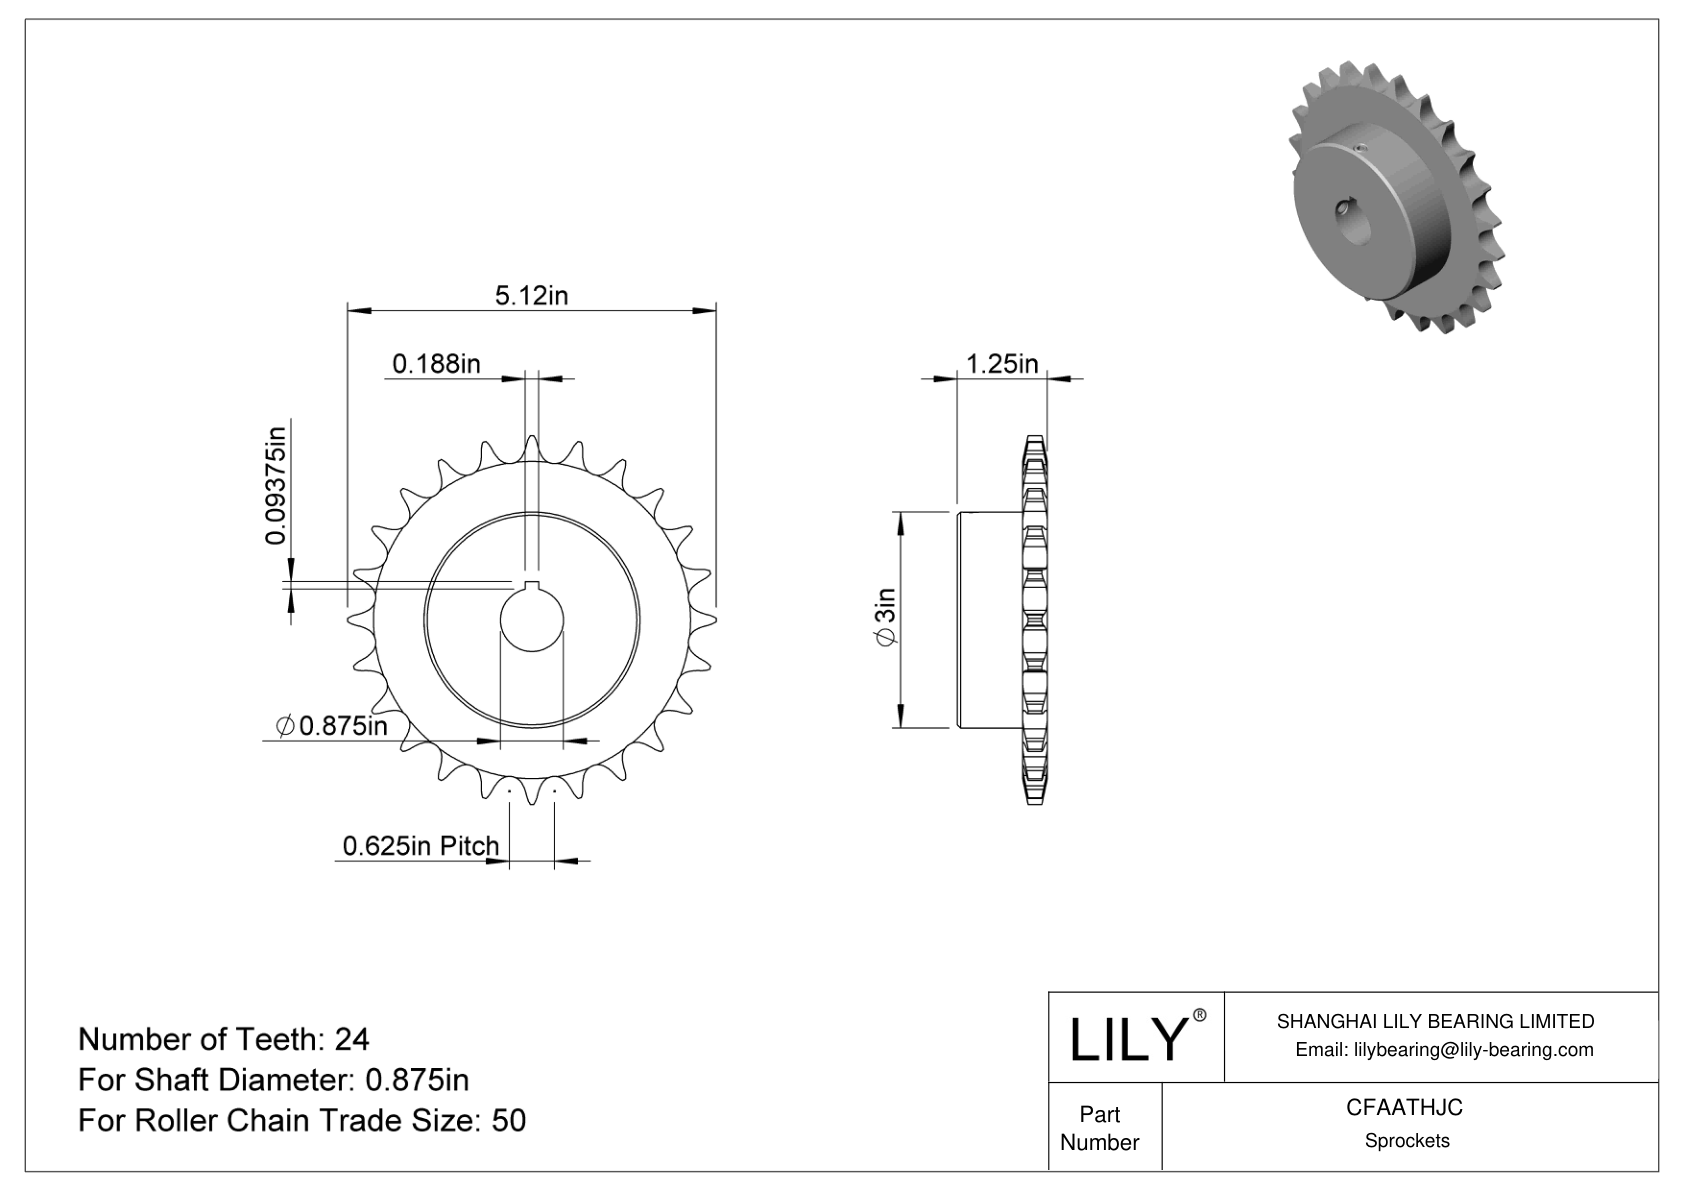 CFAATHJC Wear-Resistant Sprockets for ANSI Roller Chain cad drawing